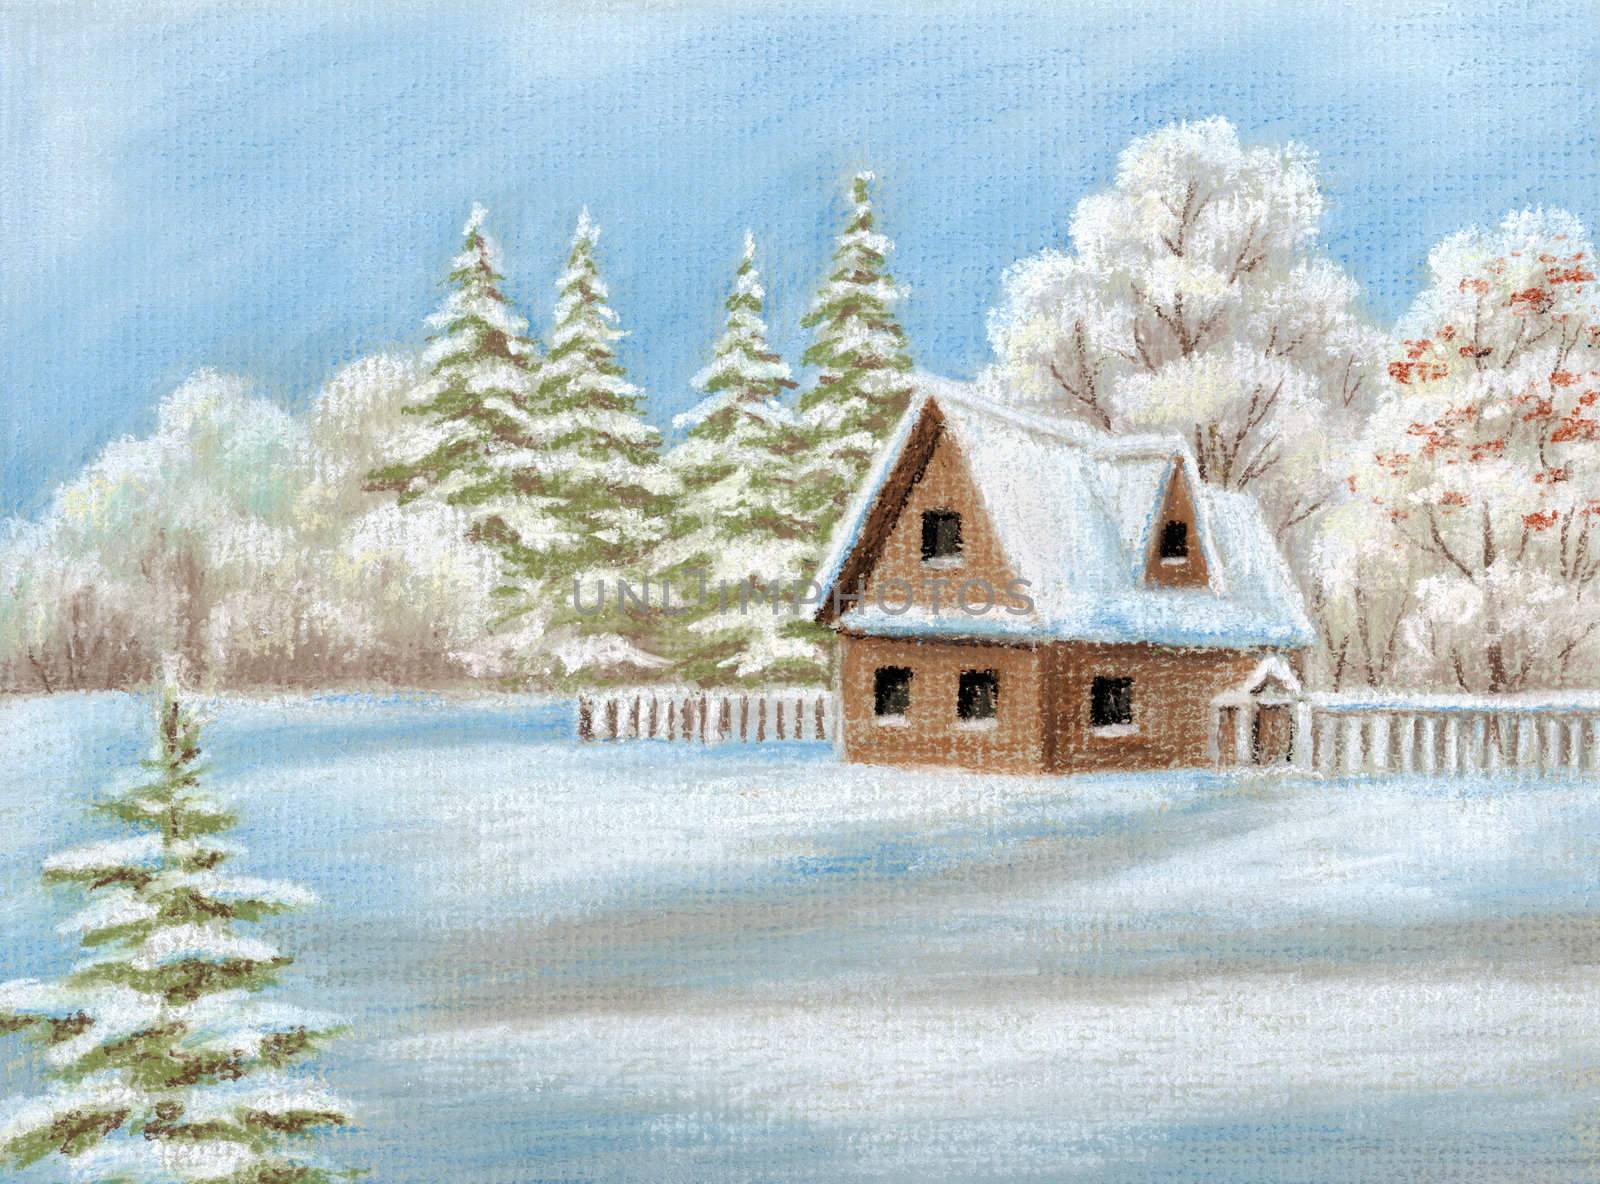 House in winter forest by alexcoolok